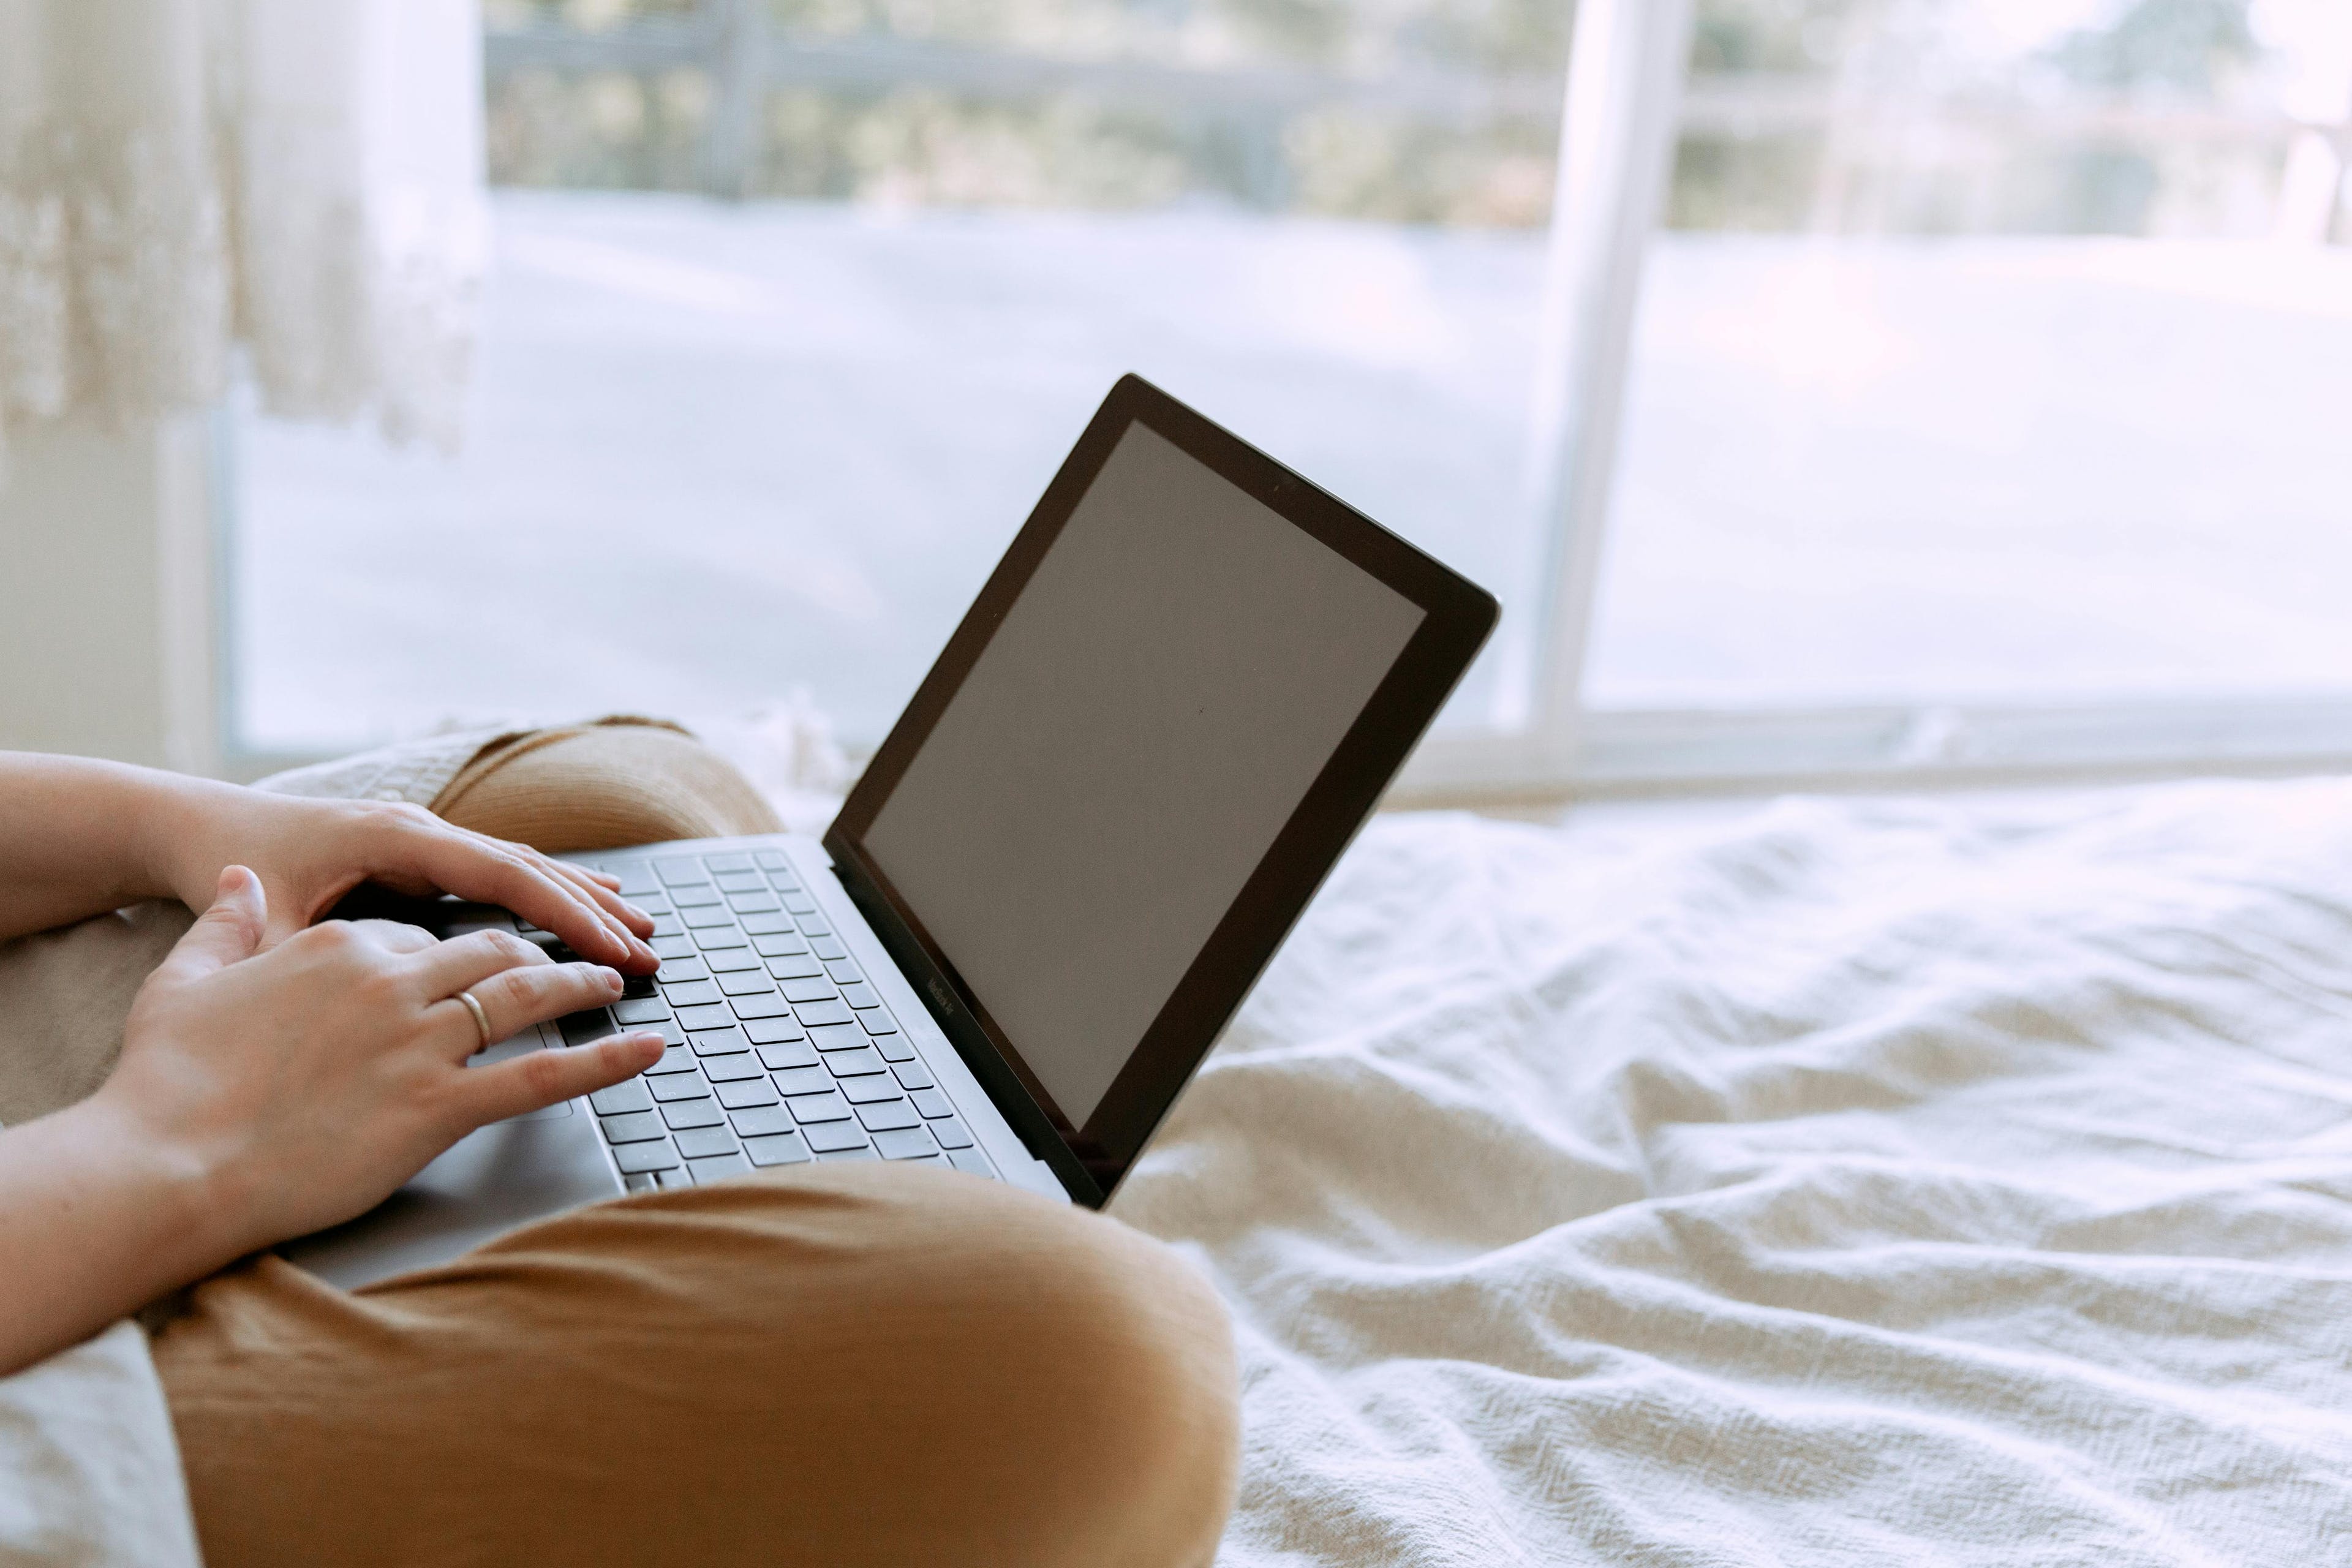 A person is typing on a laptop, comfortably sitting on a bed with a light blanket, focusing on marketing and analytics tasks in a serene, natural light setting.